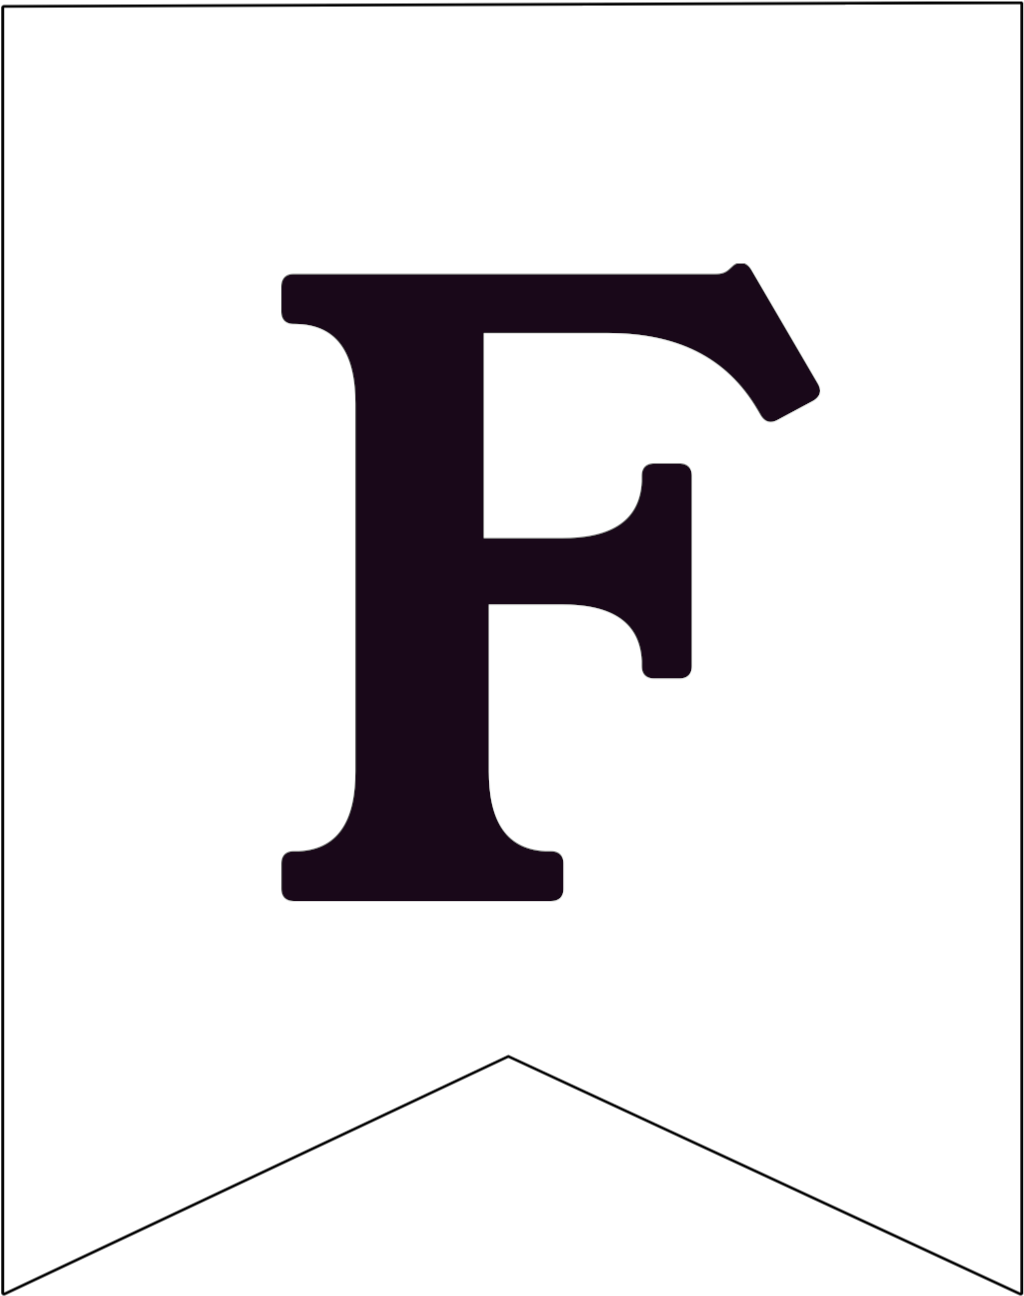 A Black Letter F On A White Background